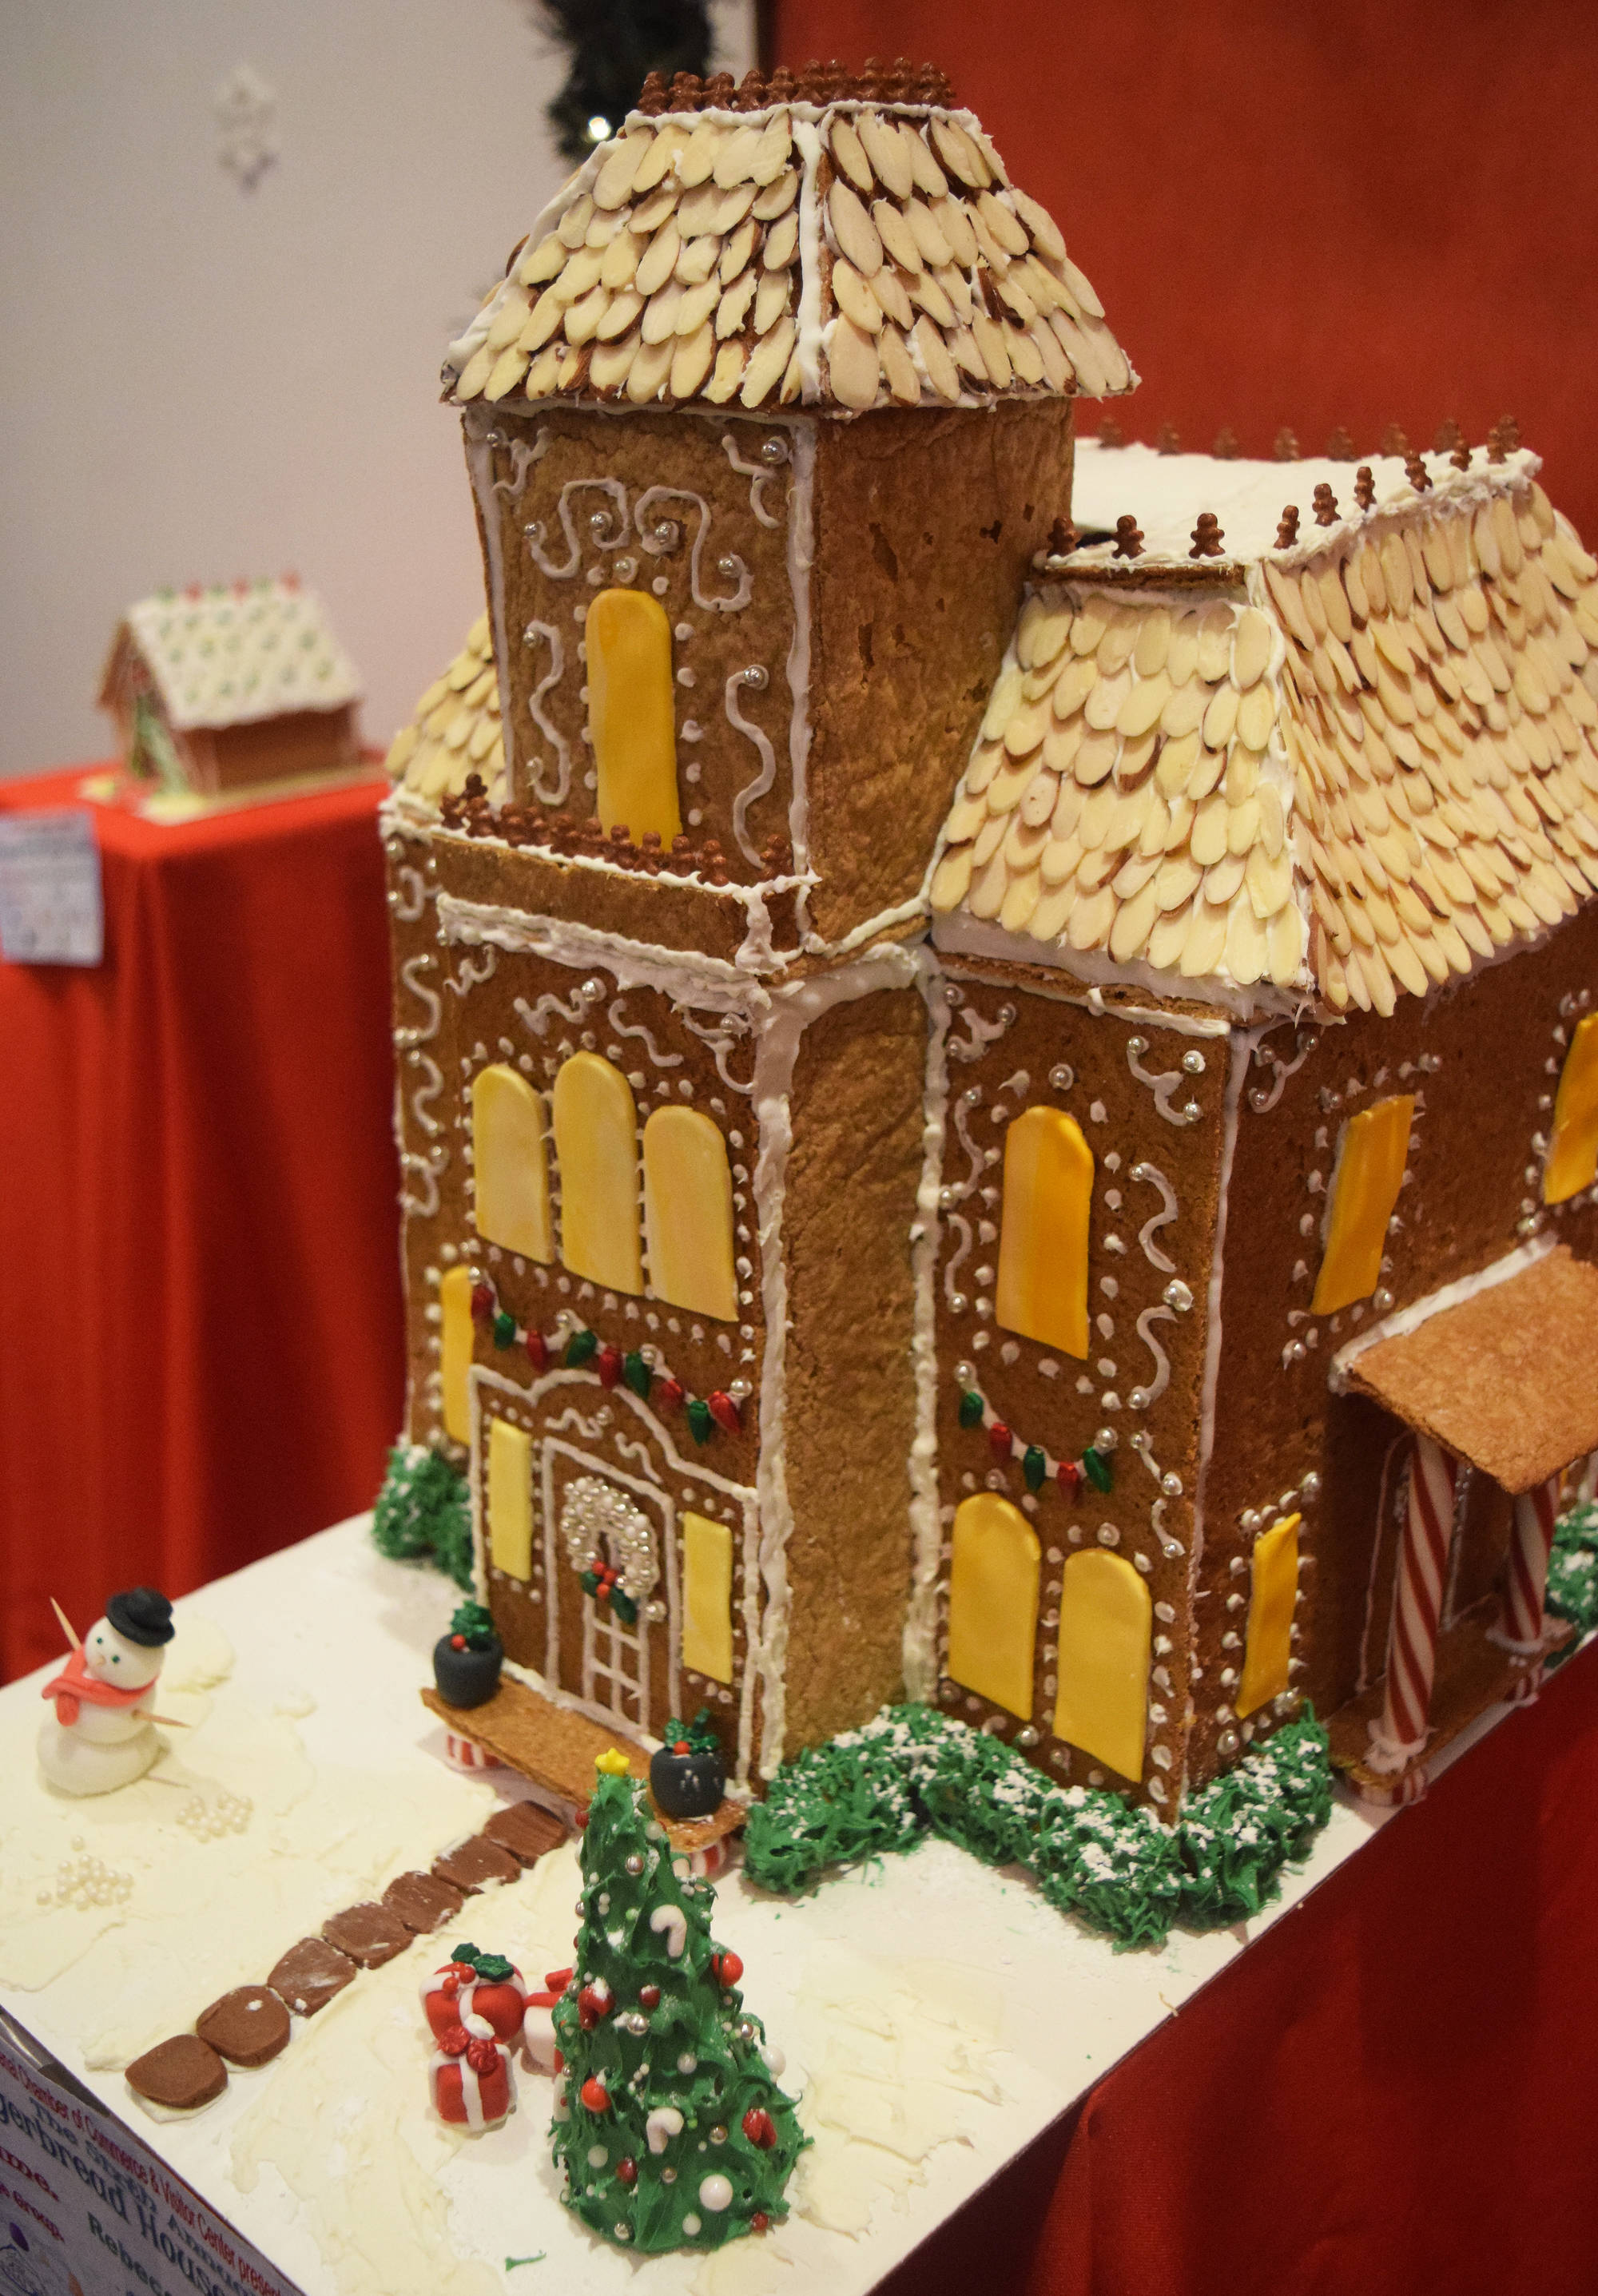 A gingerbread house entry by Abigail Youngberg sits on display at the Kenai Chamber of Commerce and Visitor Center as part of its gingerbread house contest. The gingerbread houses will be on display until Dec. 21. (Photo by Joey Klecka/Peninsula Clarion)